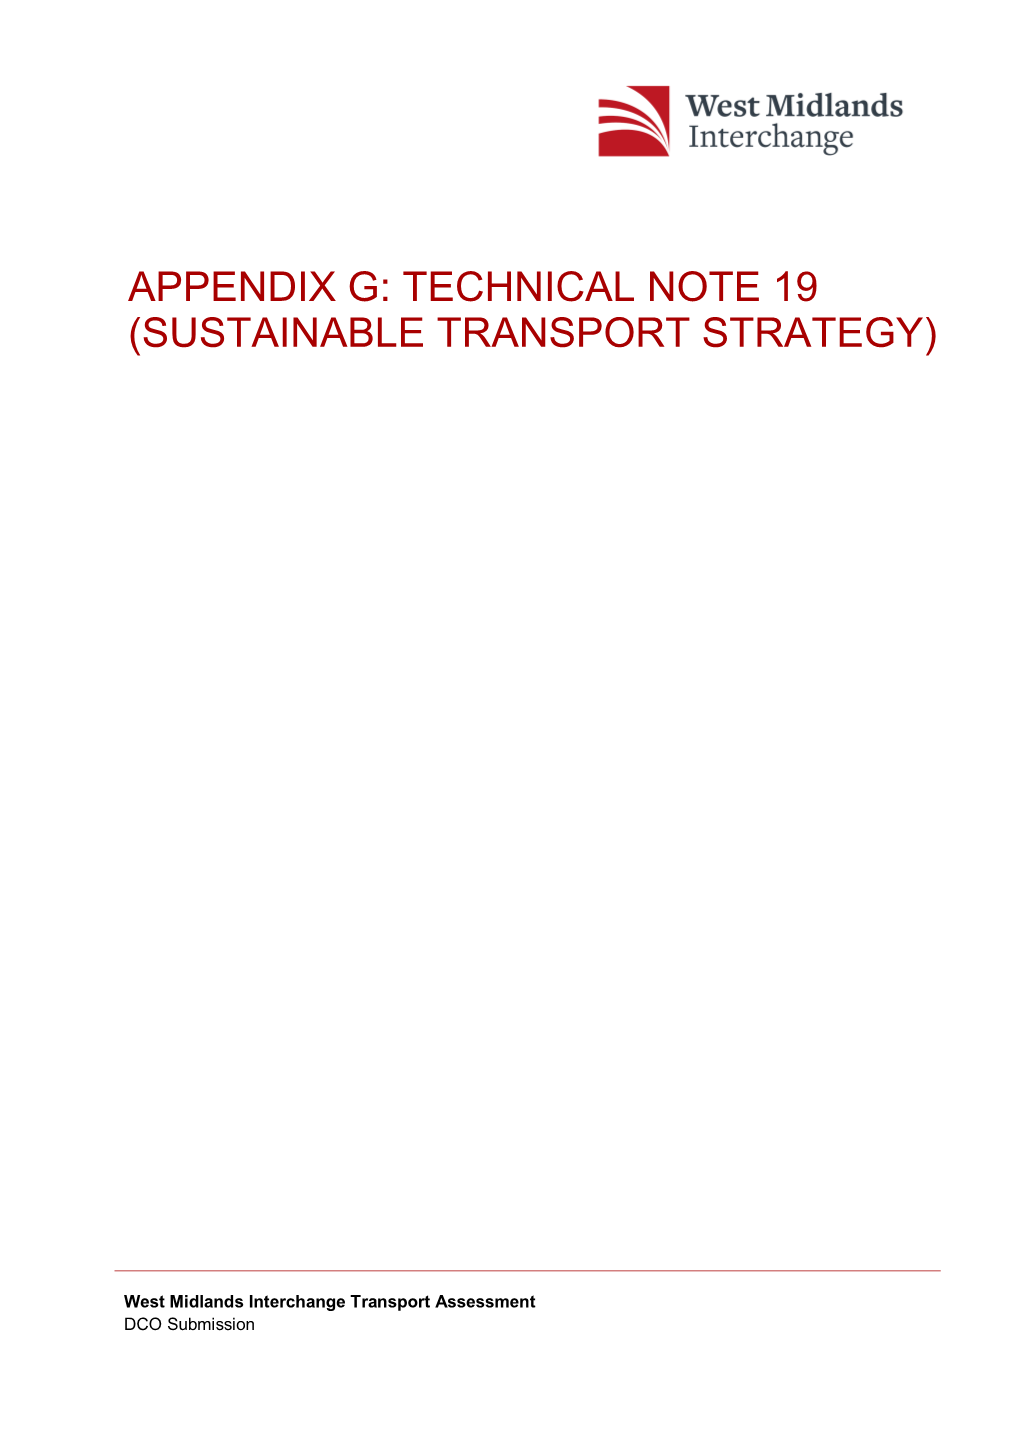 Appendix G: Technical Note 19 (Sustainable Transport Strategy)